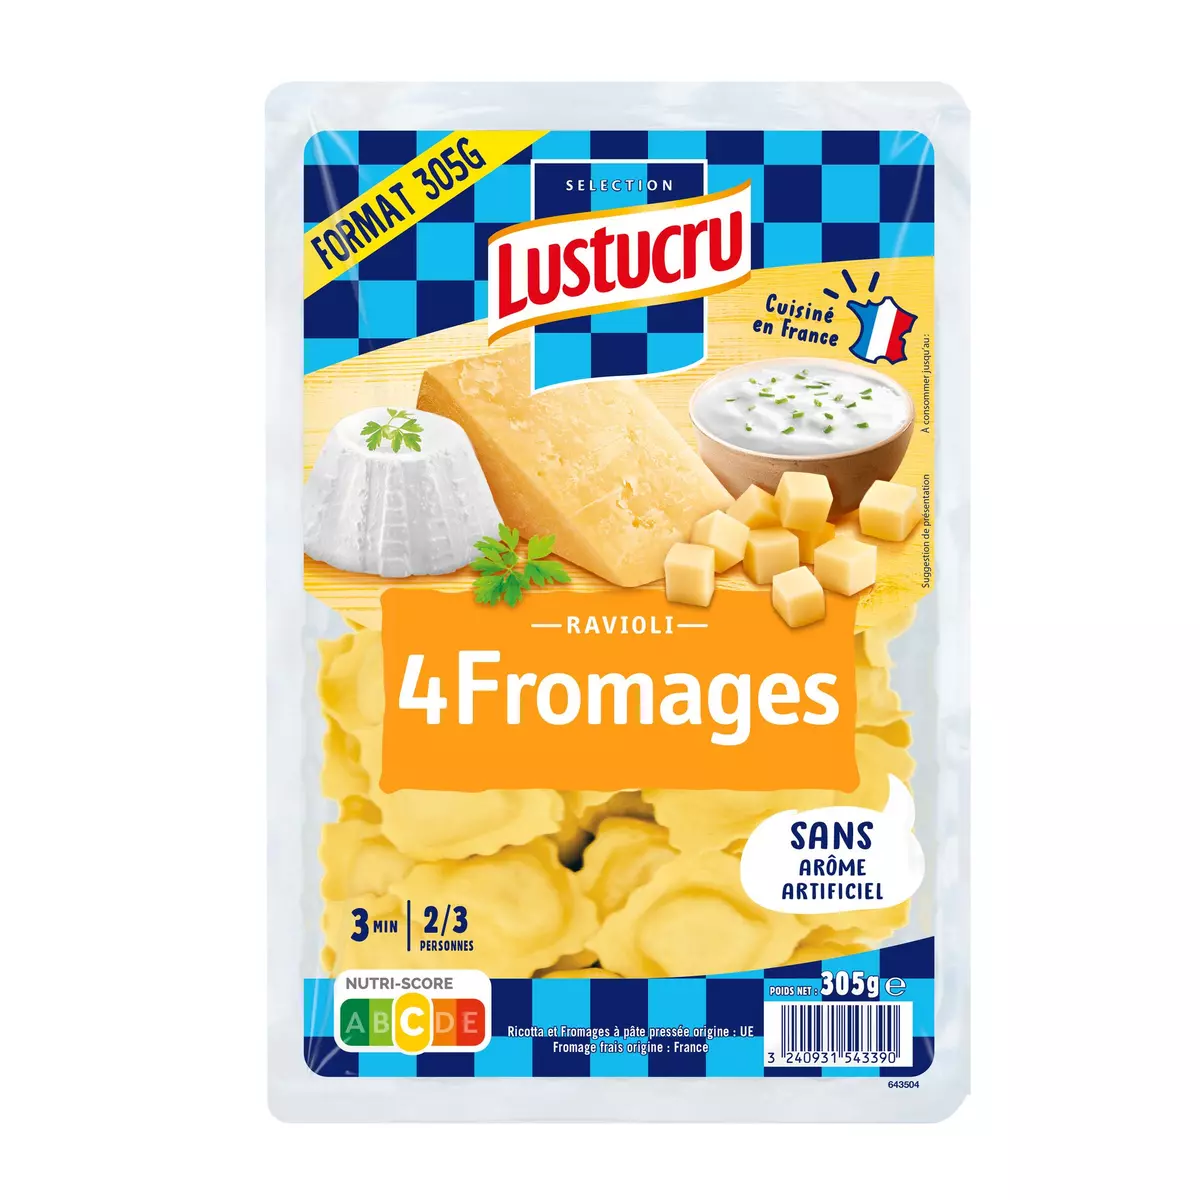 LUSTUCRU Ravioli 4 fromages 2-3 portions 305g